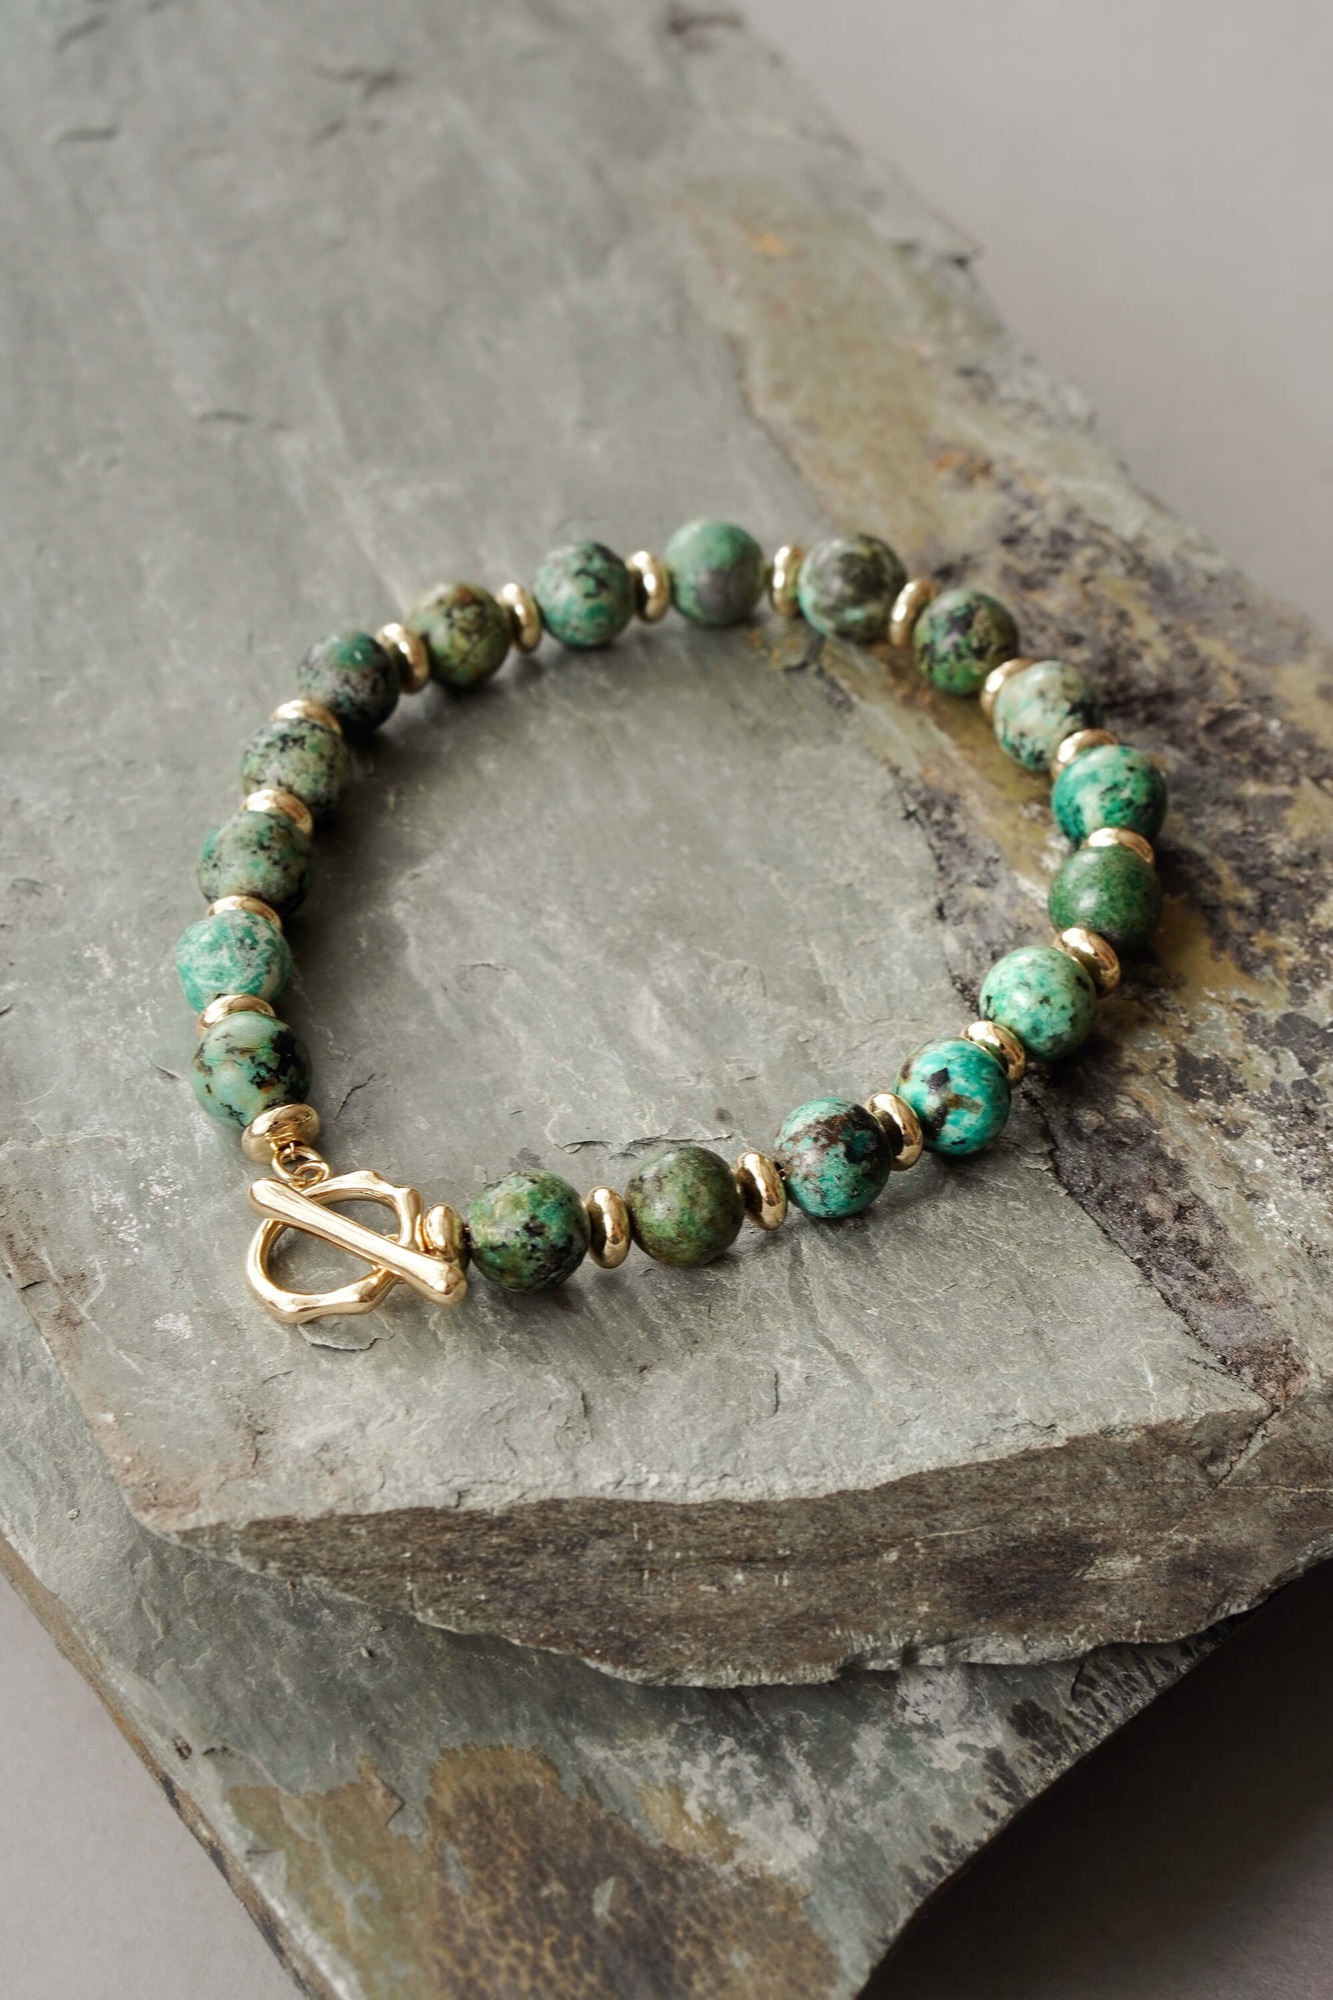 African Turquoise Bracelet by Xander Kostroma